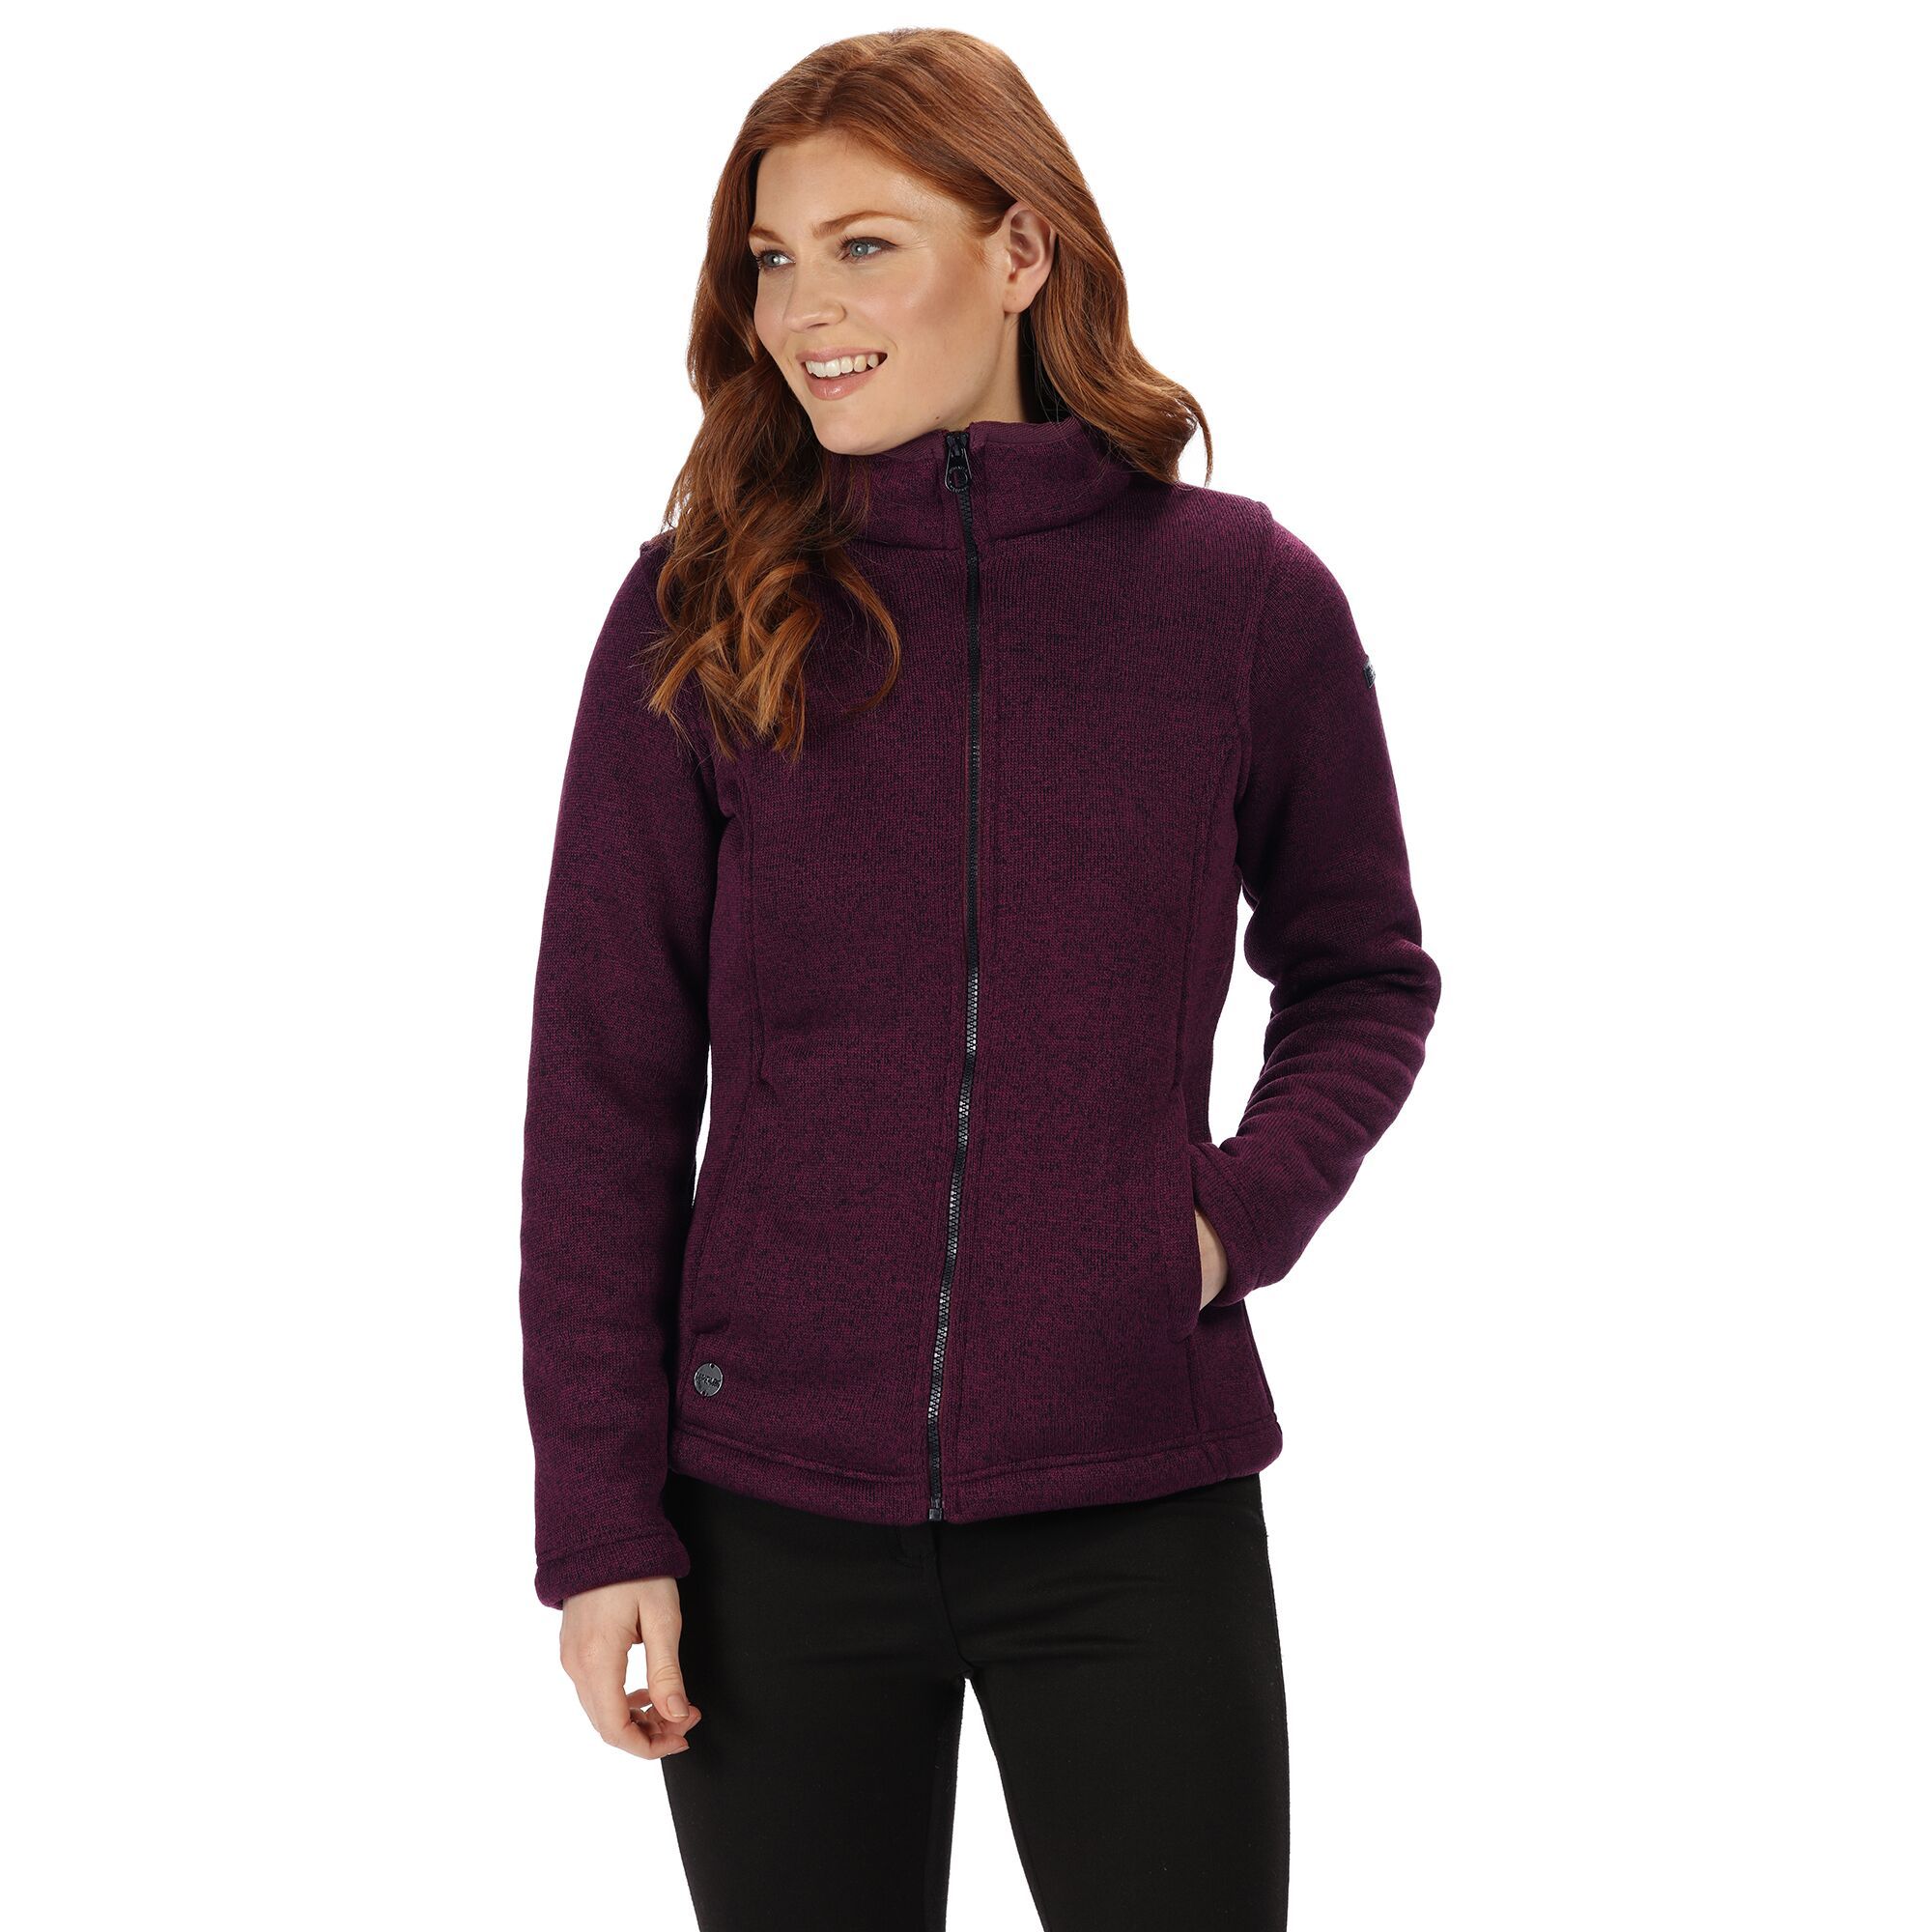 Womens full zip fleece made of 430gsm Polyester knit effect hi pile bonded material. 2 zipped lower pockets. Ideal for wearing outdoors on a cold day. 100% Polyester.